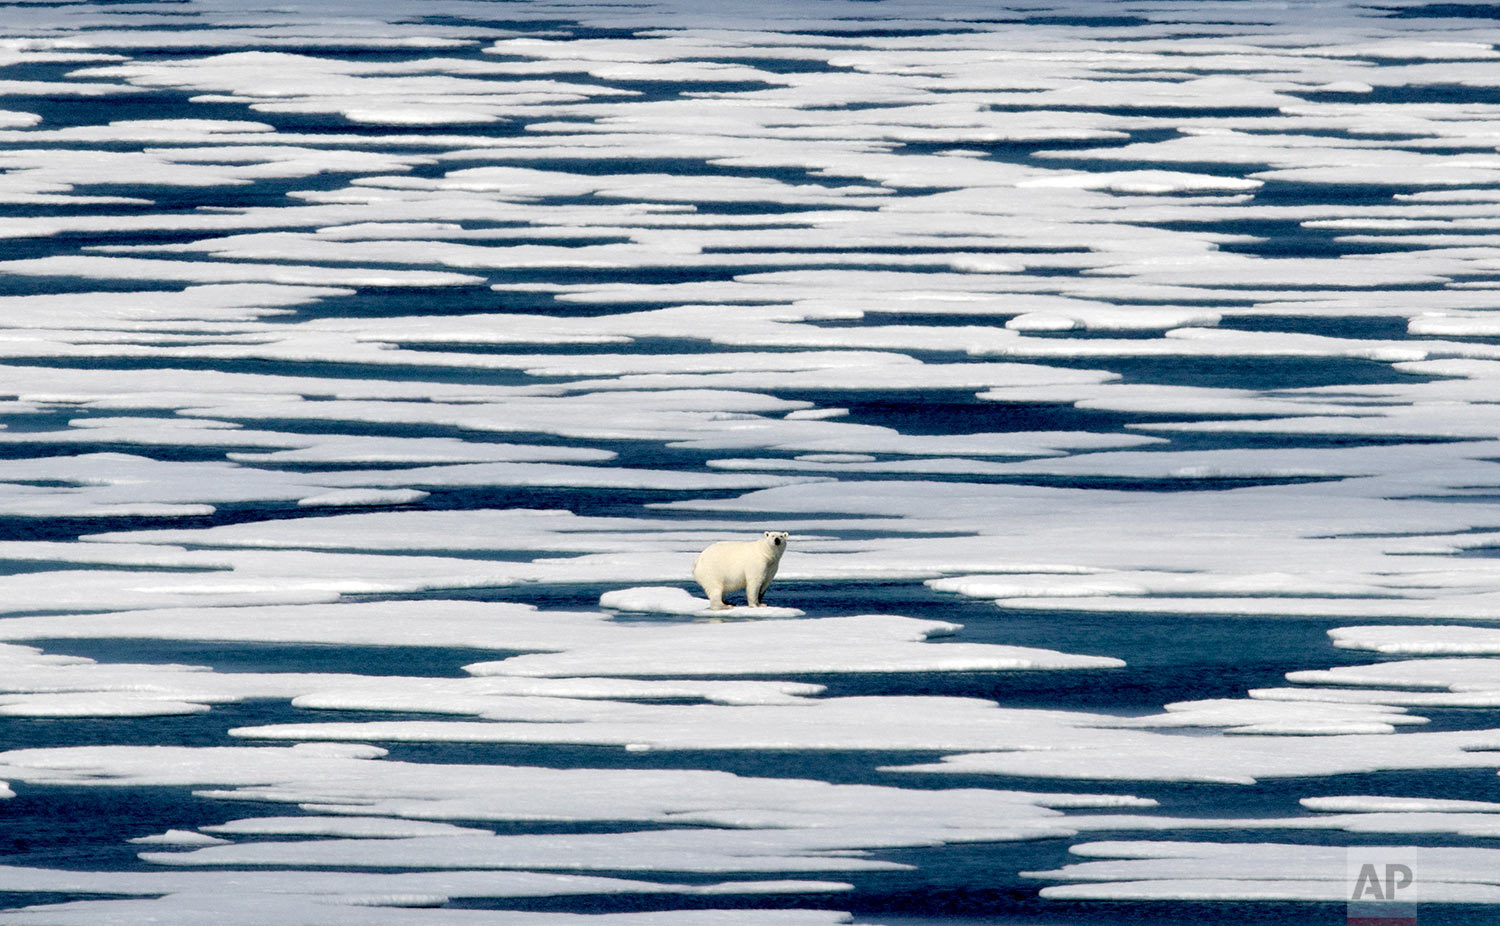  A polar bear stands on the ice in the Franklin Strait in the Canadian Arctic Archipelago, Saturday, July 22, 2017. While some polar bears are expected to follow the retreating ice northward, others will head south, where they will come into greater 